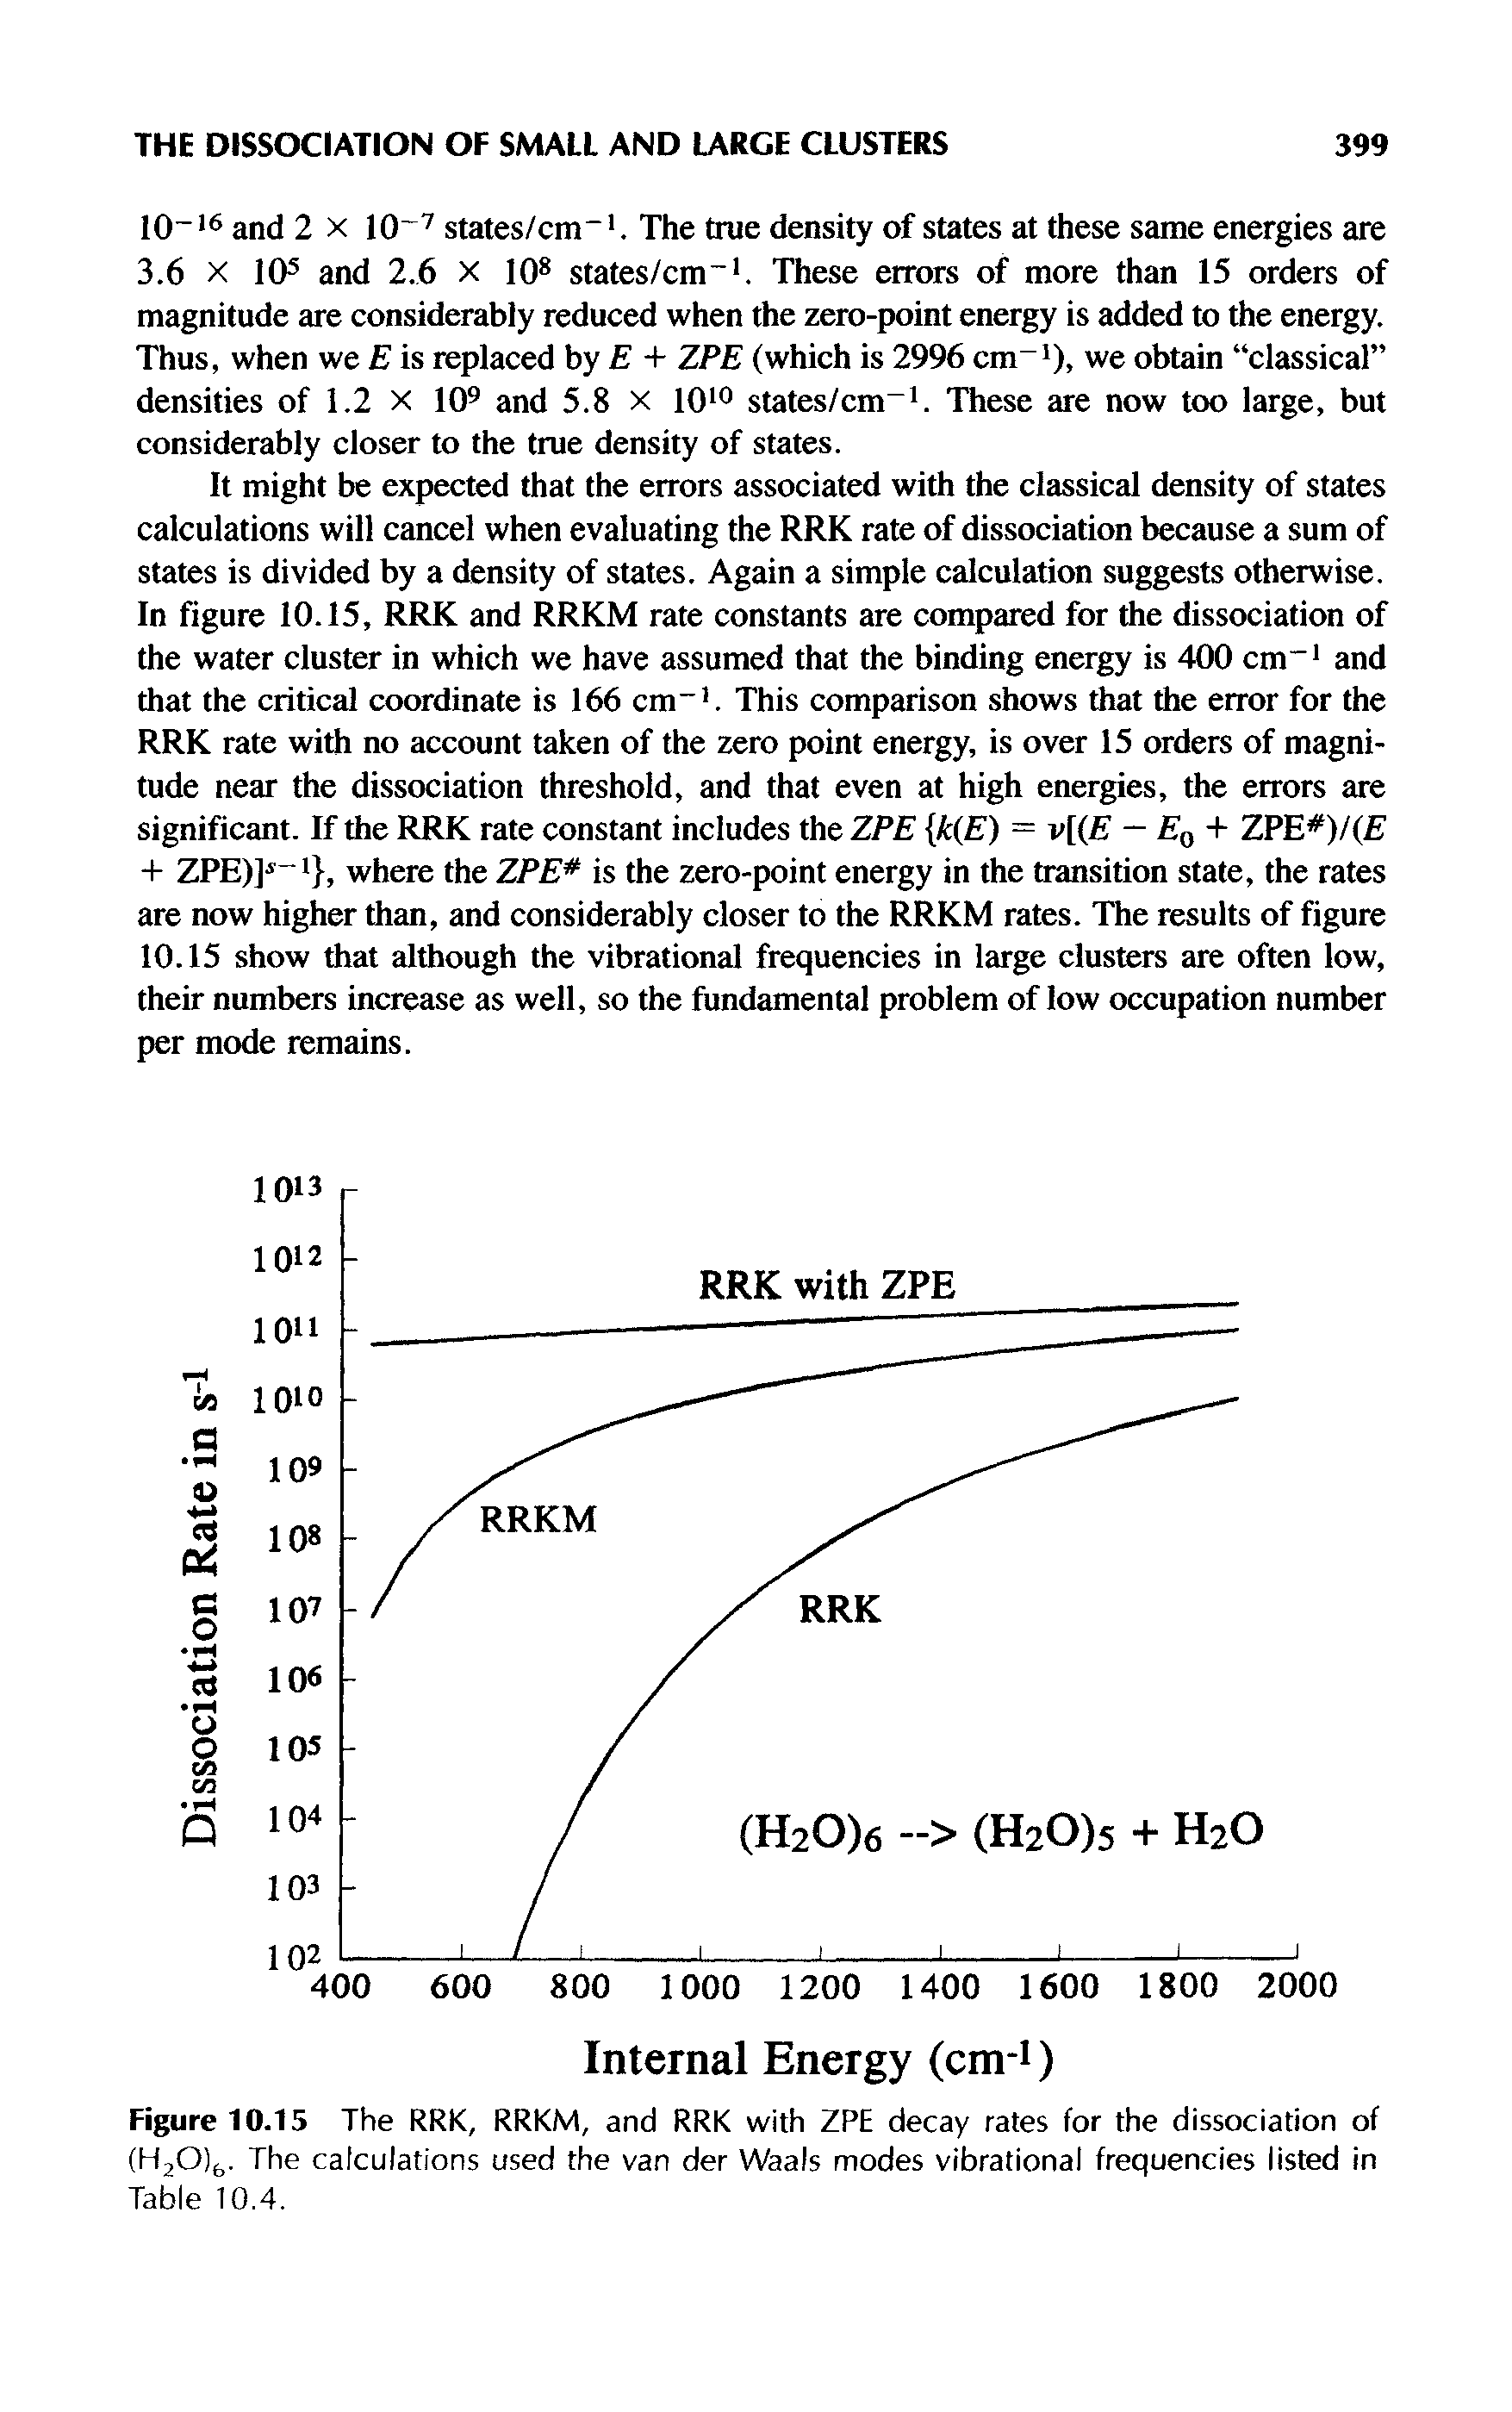 Figure 10.15 The RRK, RRKM, and RRK with ZPE decay rates for the dissociation of (HjOj,. The calculations used the van der Waals modes vibrational frequencies listed in Table 10.4.